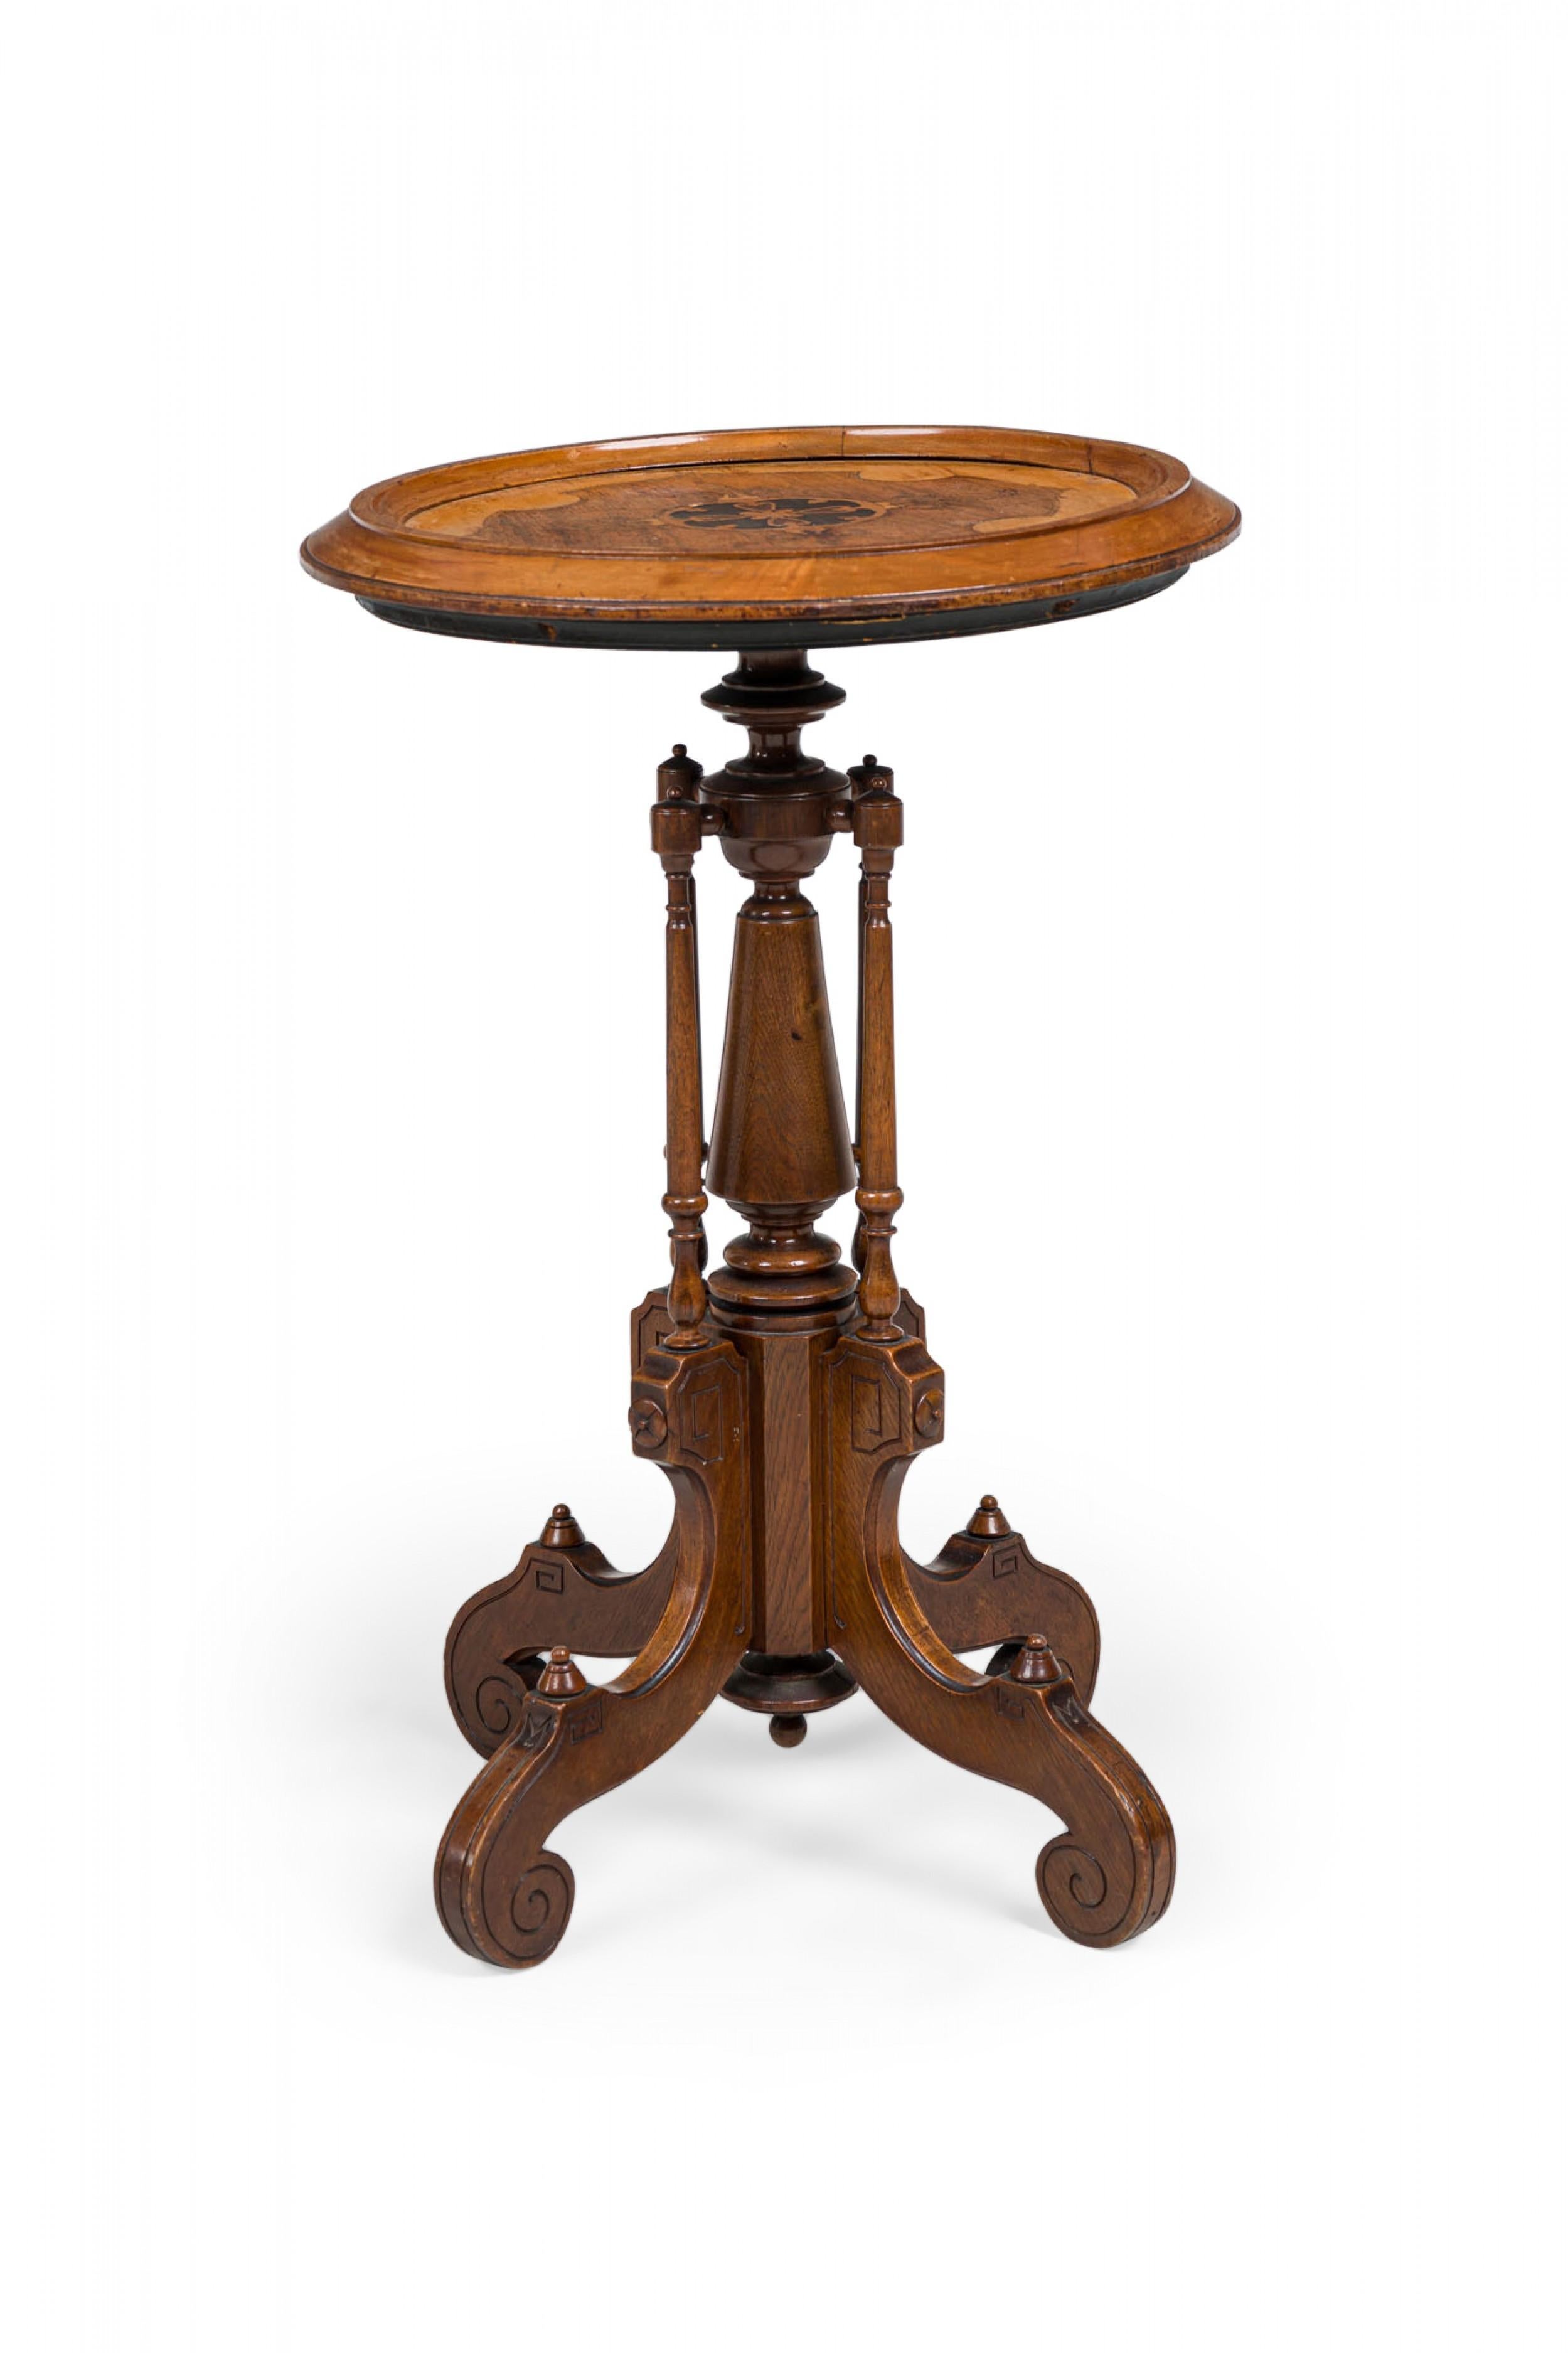 19th Century American Victorian Circular Carved Wood Plant Stand/Side Table For Sale